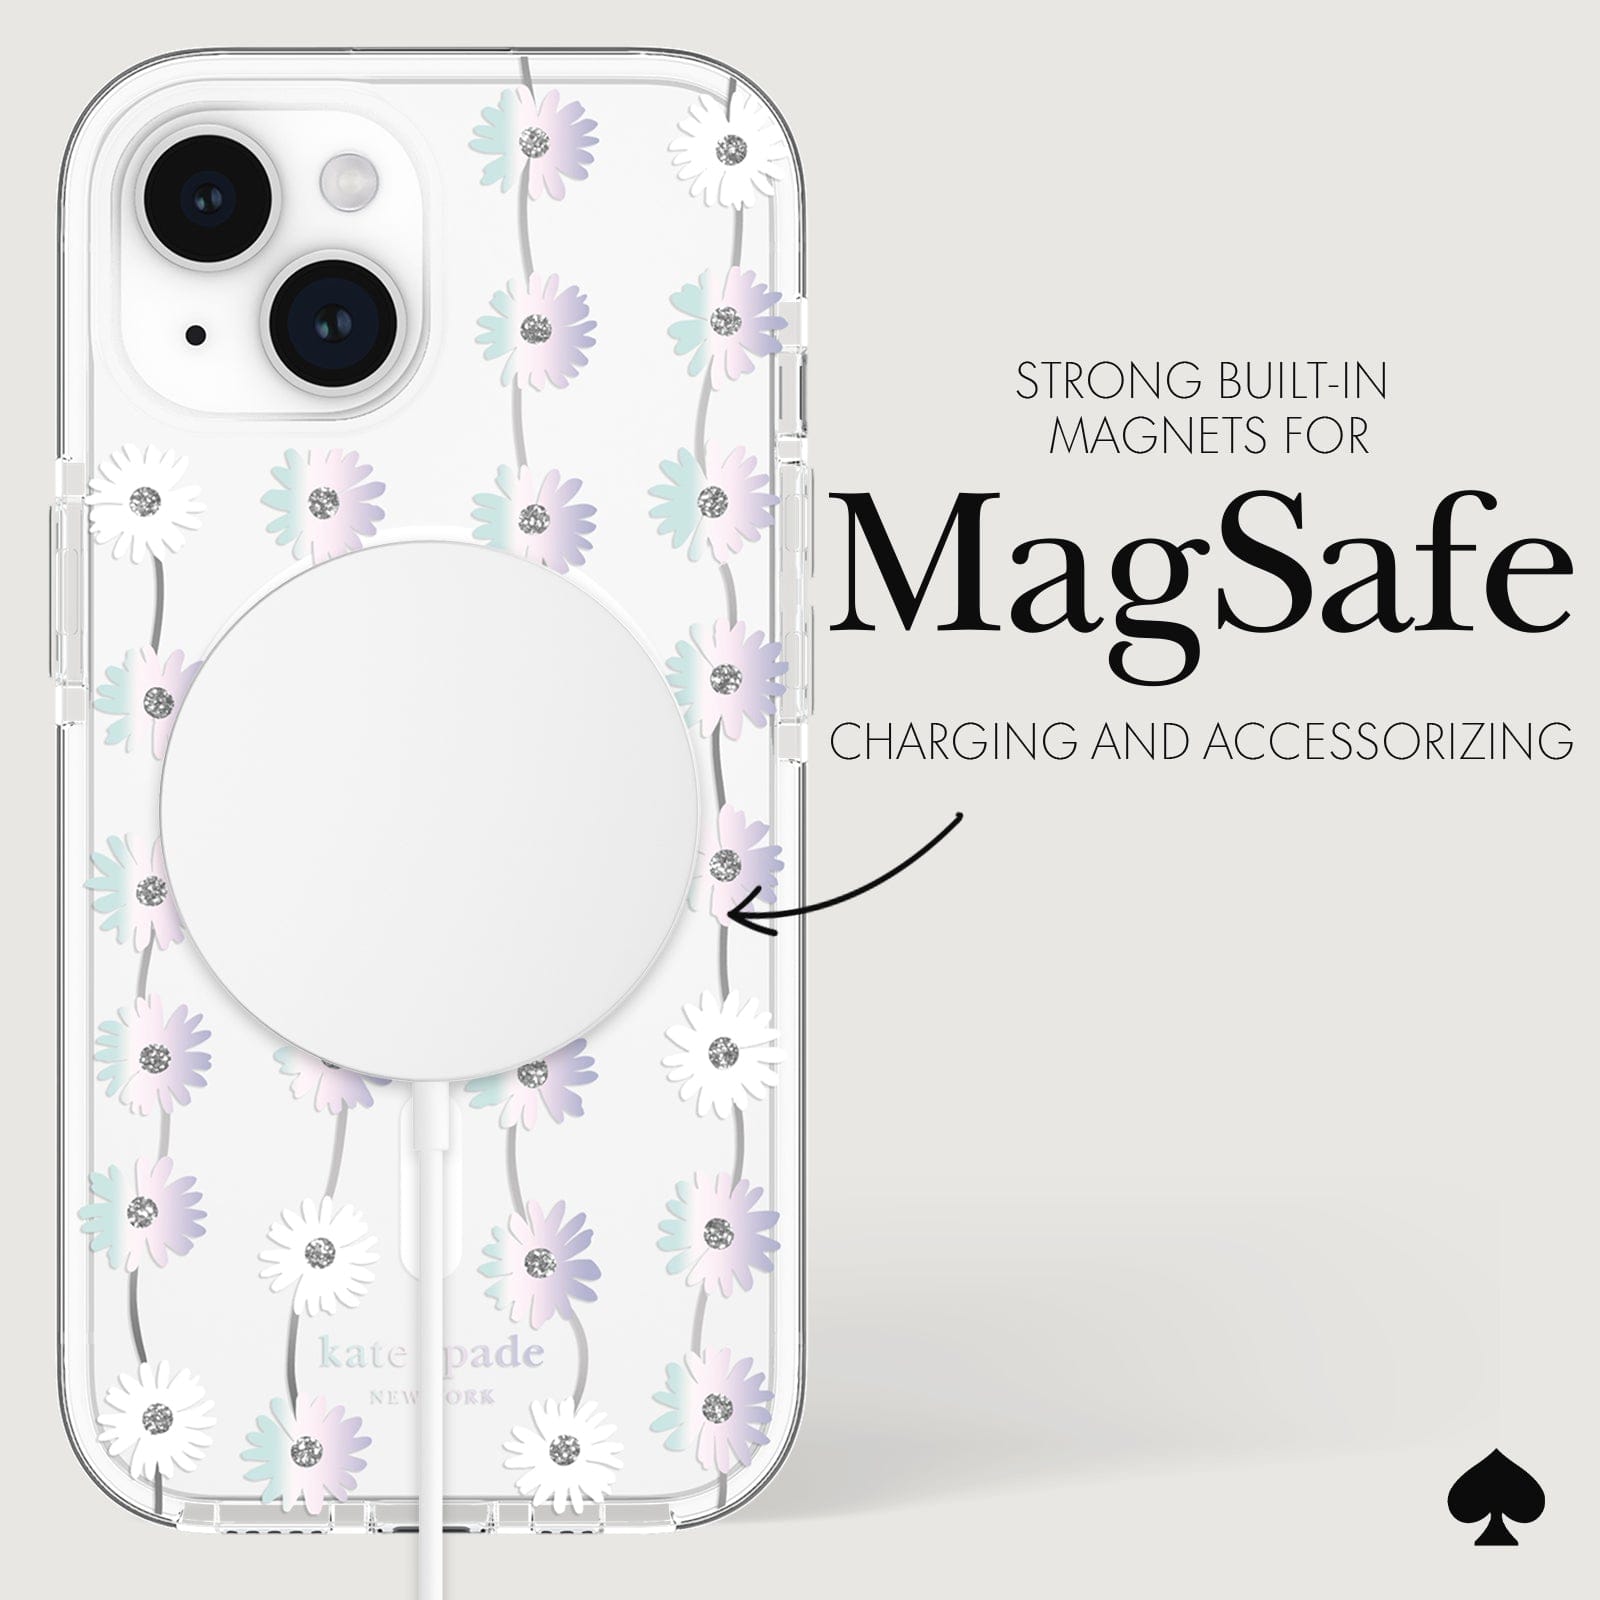 STRONG BUILT IN MAGNETS FOR MAGSAFE CHARGING AND ACCESSORIZIG